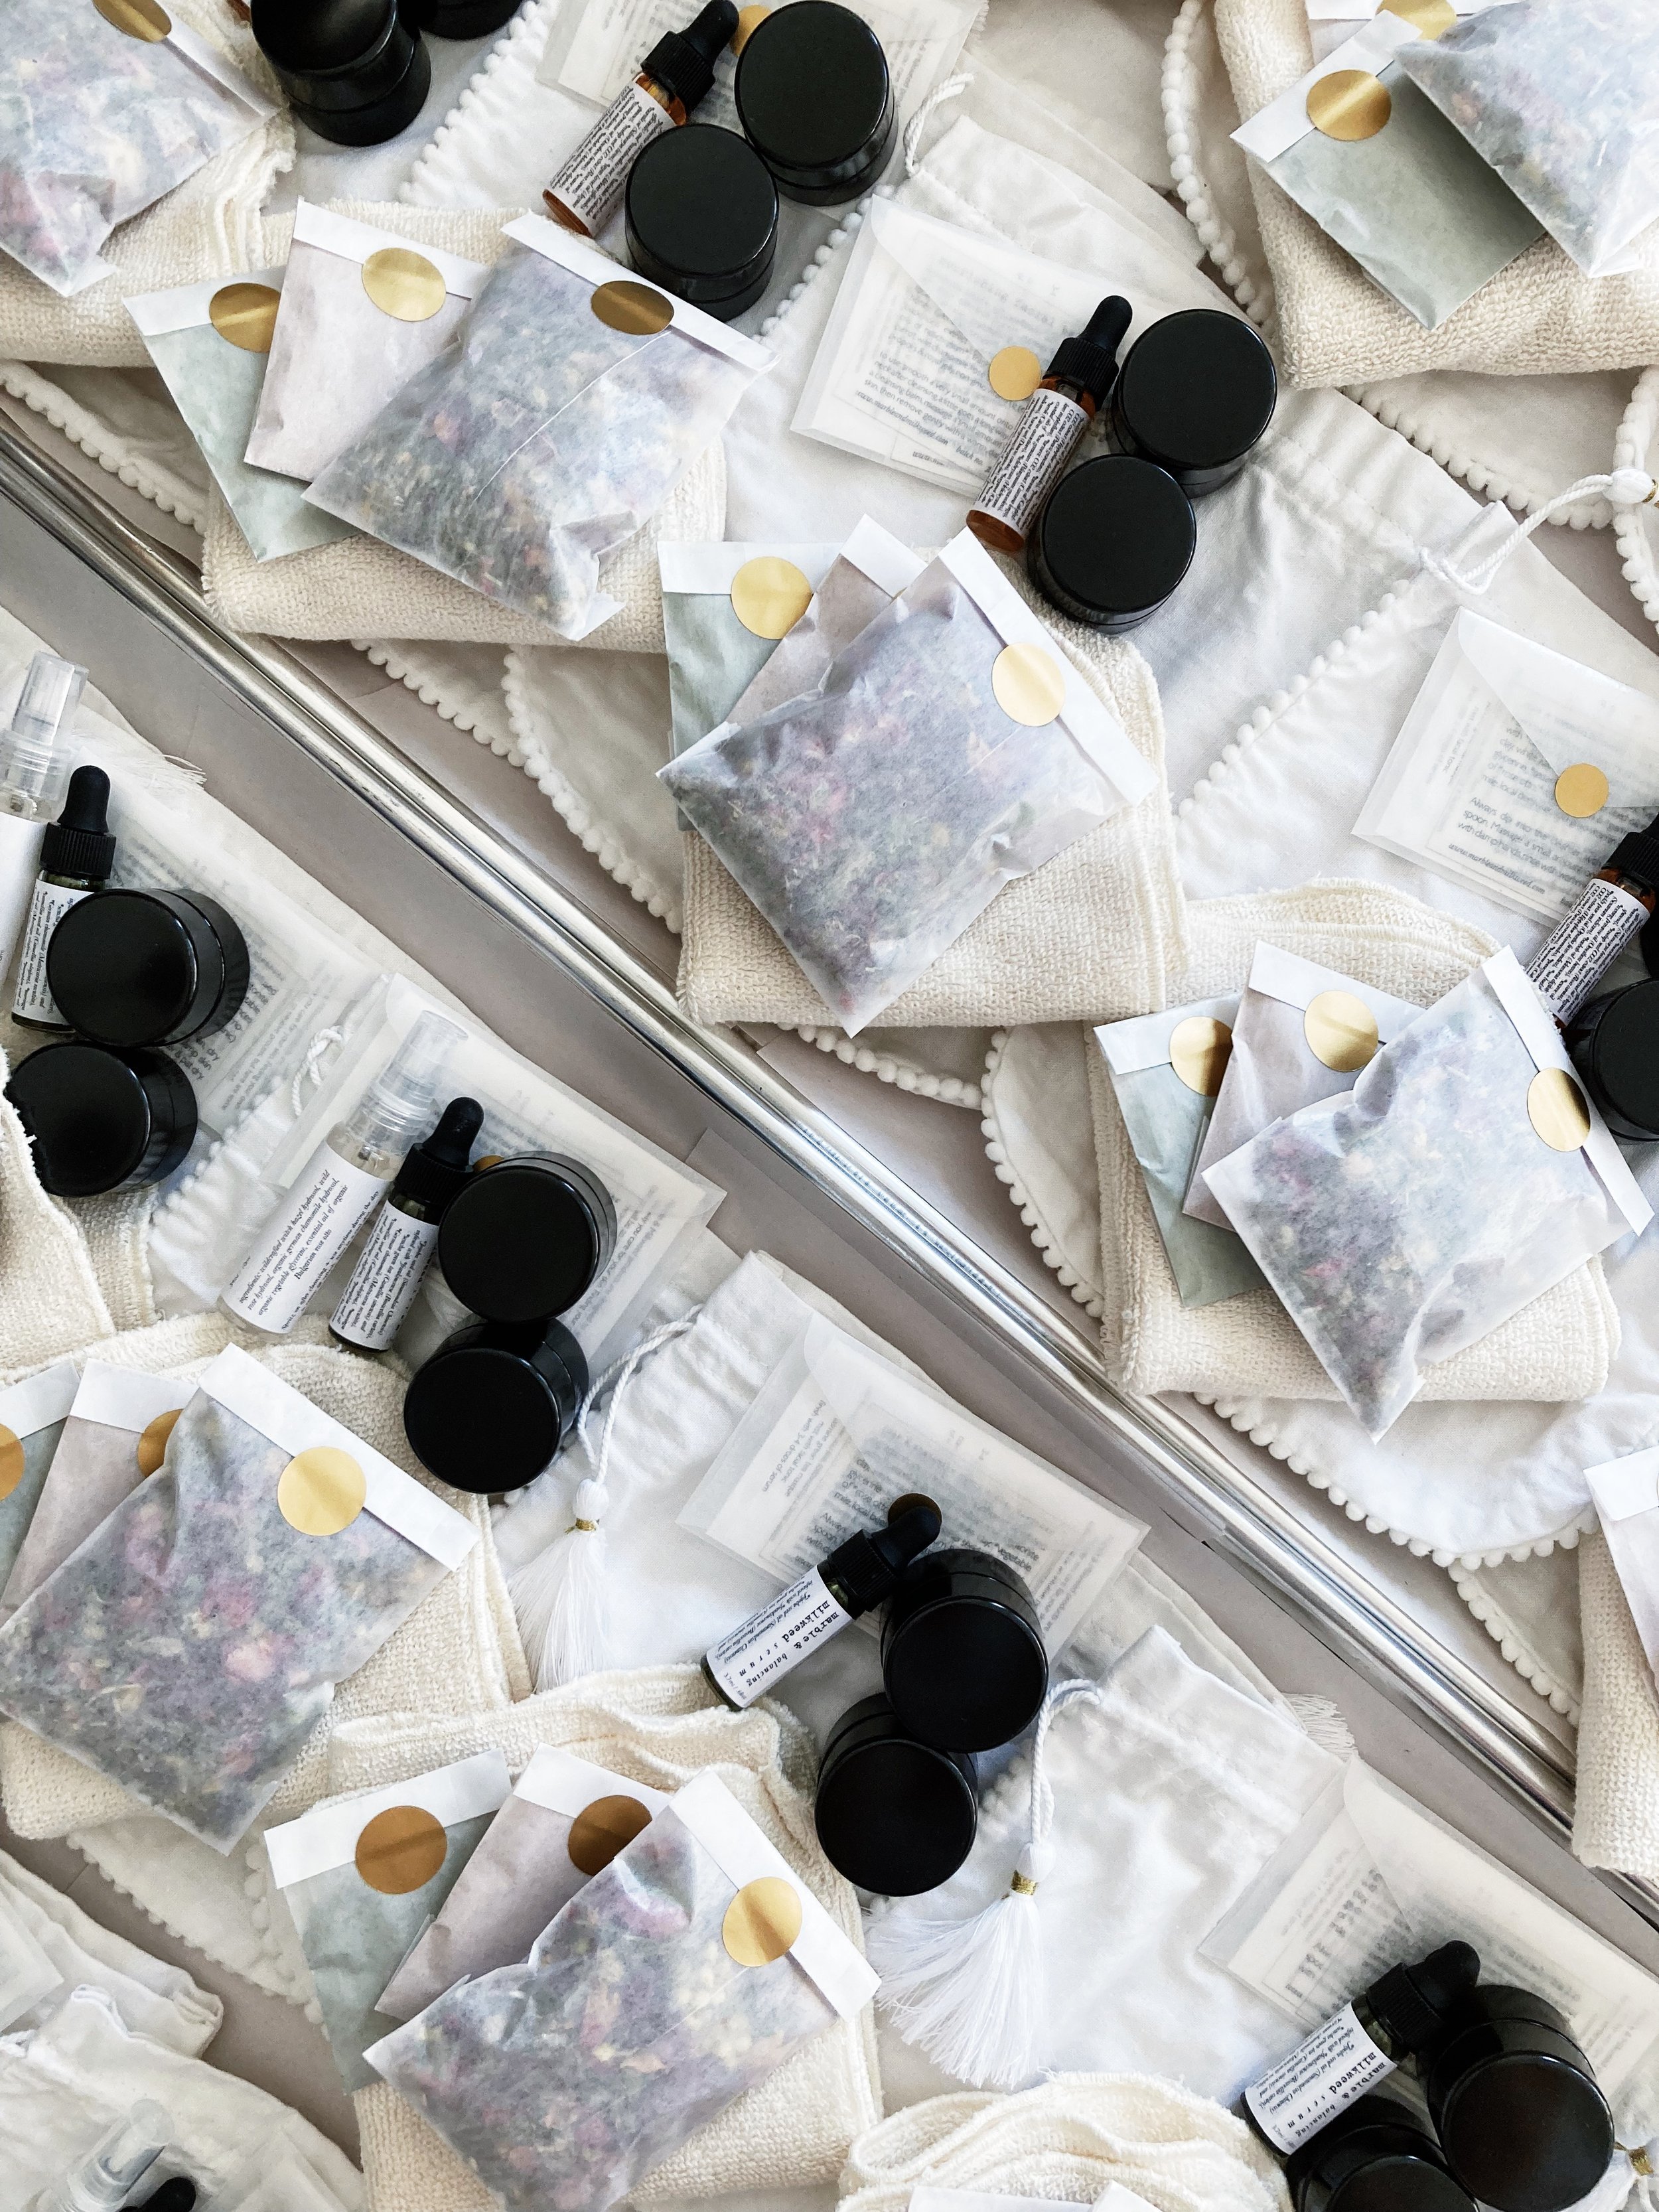 small white envelopes and black jars on a tray in the process of being packed up